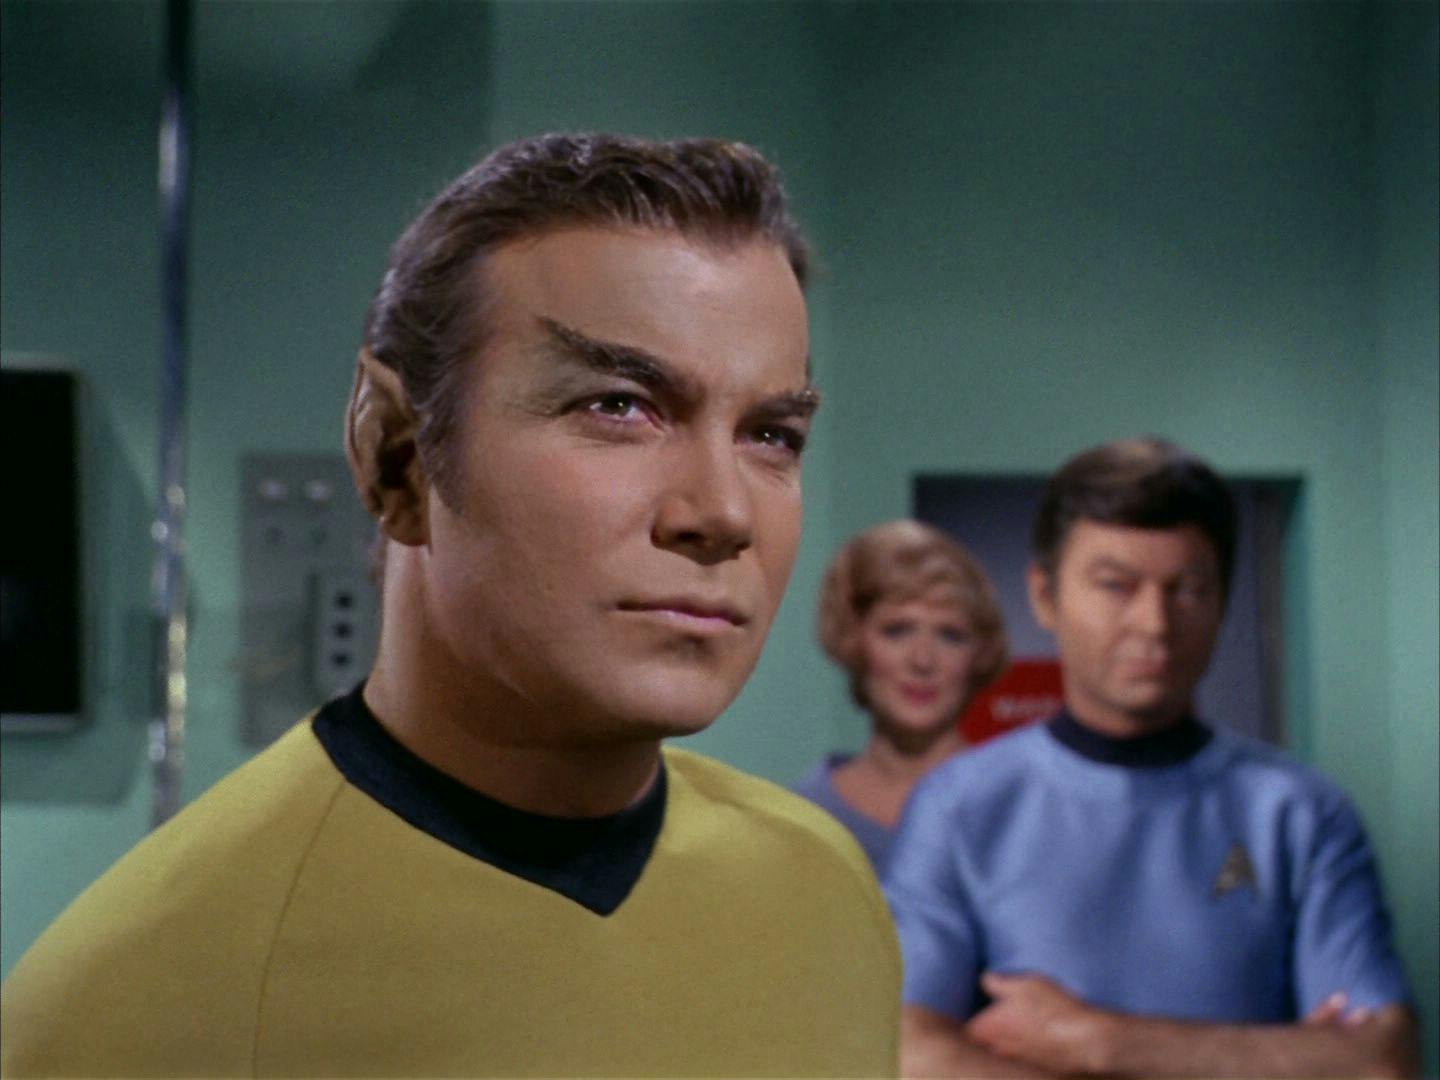 In Sickbay, Nurse Chapel and McCoy look over at Captain Kirk who just underwent a cosmetic surgery to appear Romulan in 'The Enterprise Incident'